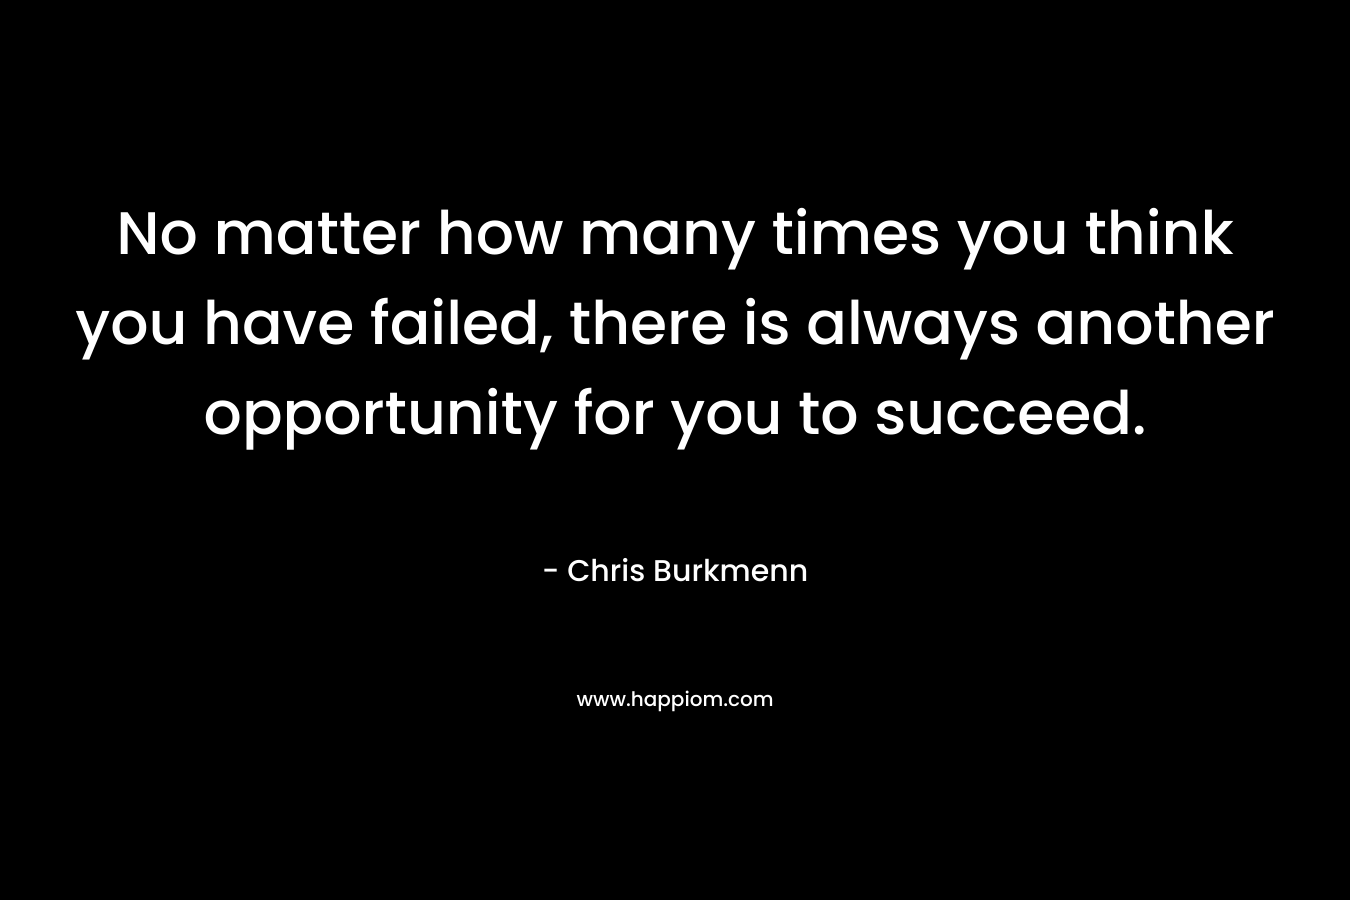 No matter how many times you think you have failed, there is always another opportunity for you to succeed.